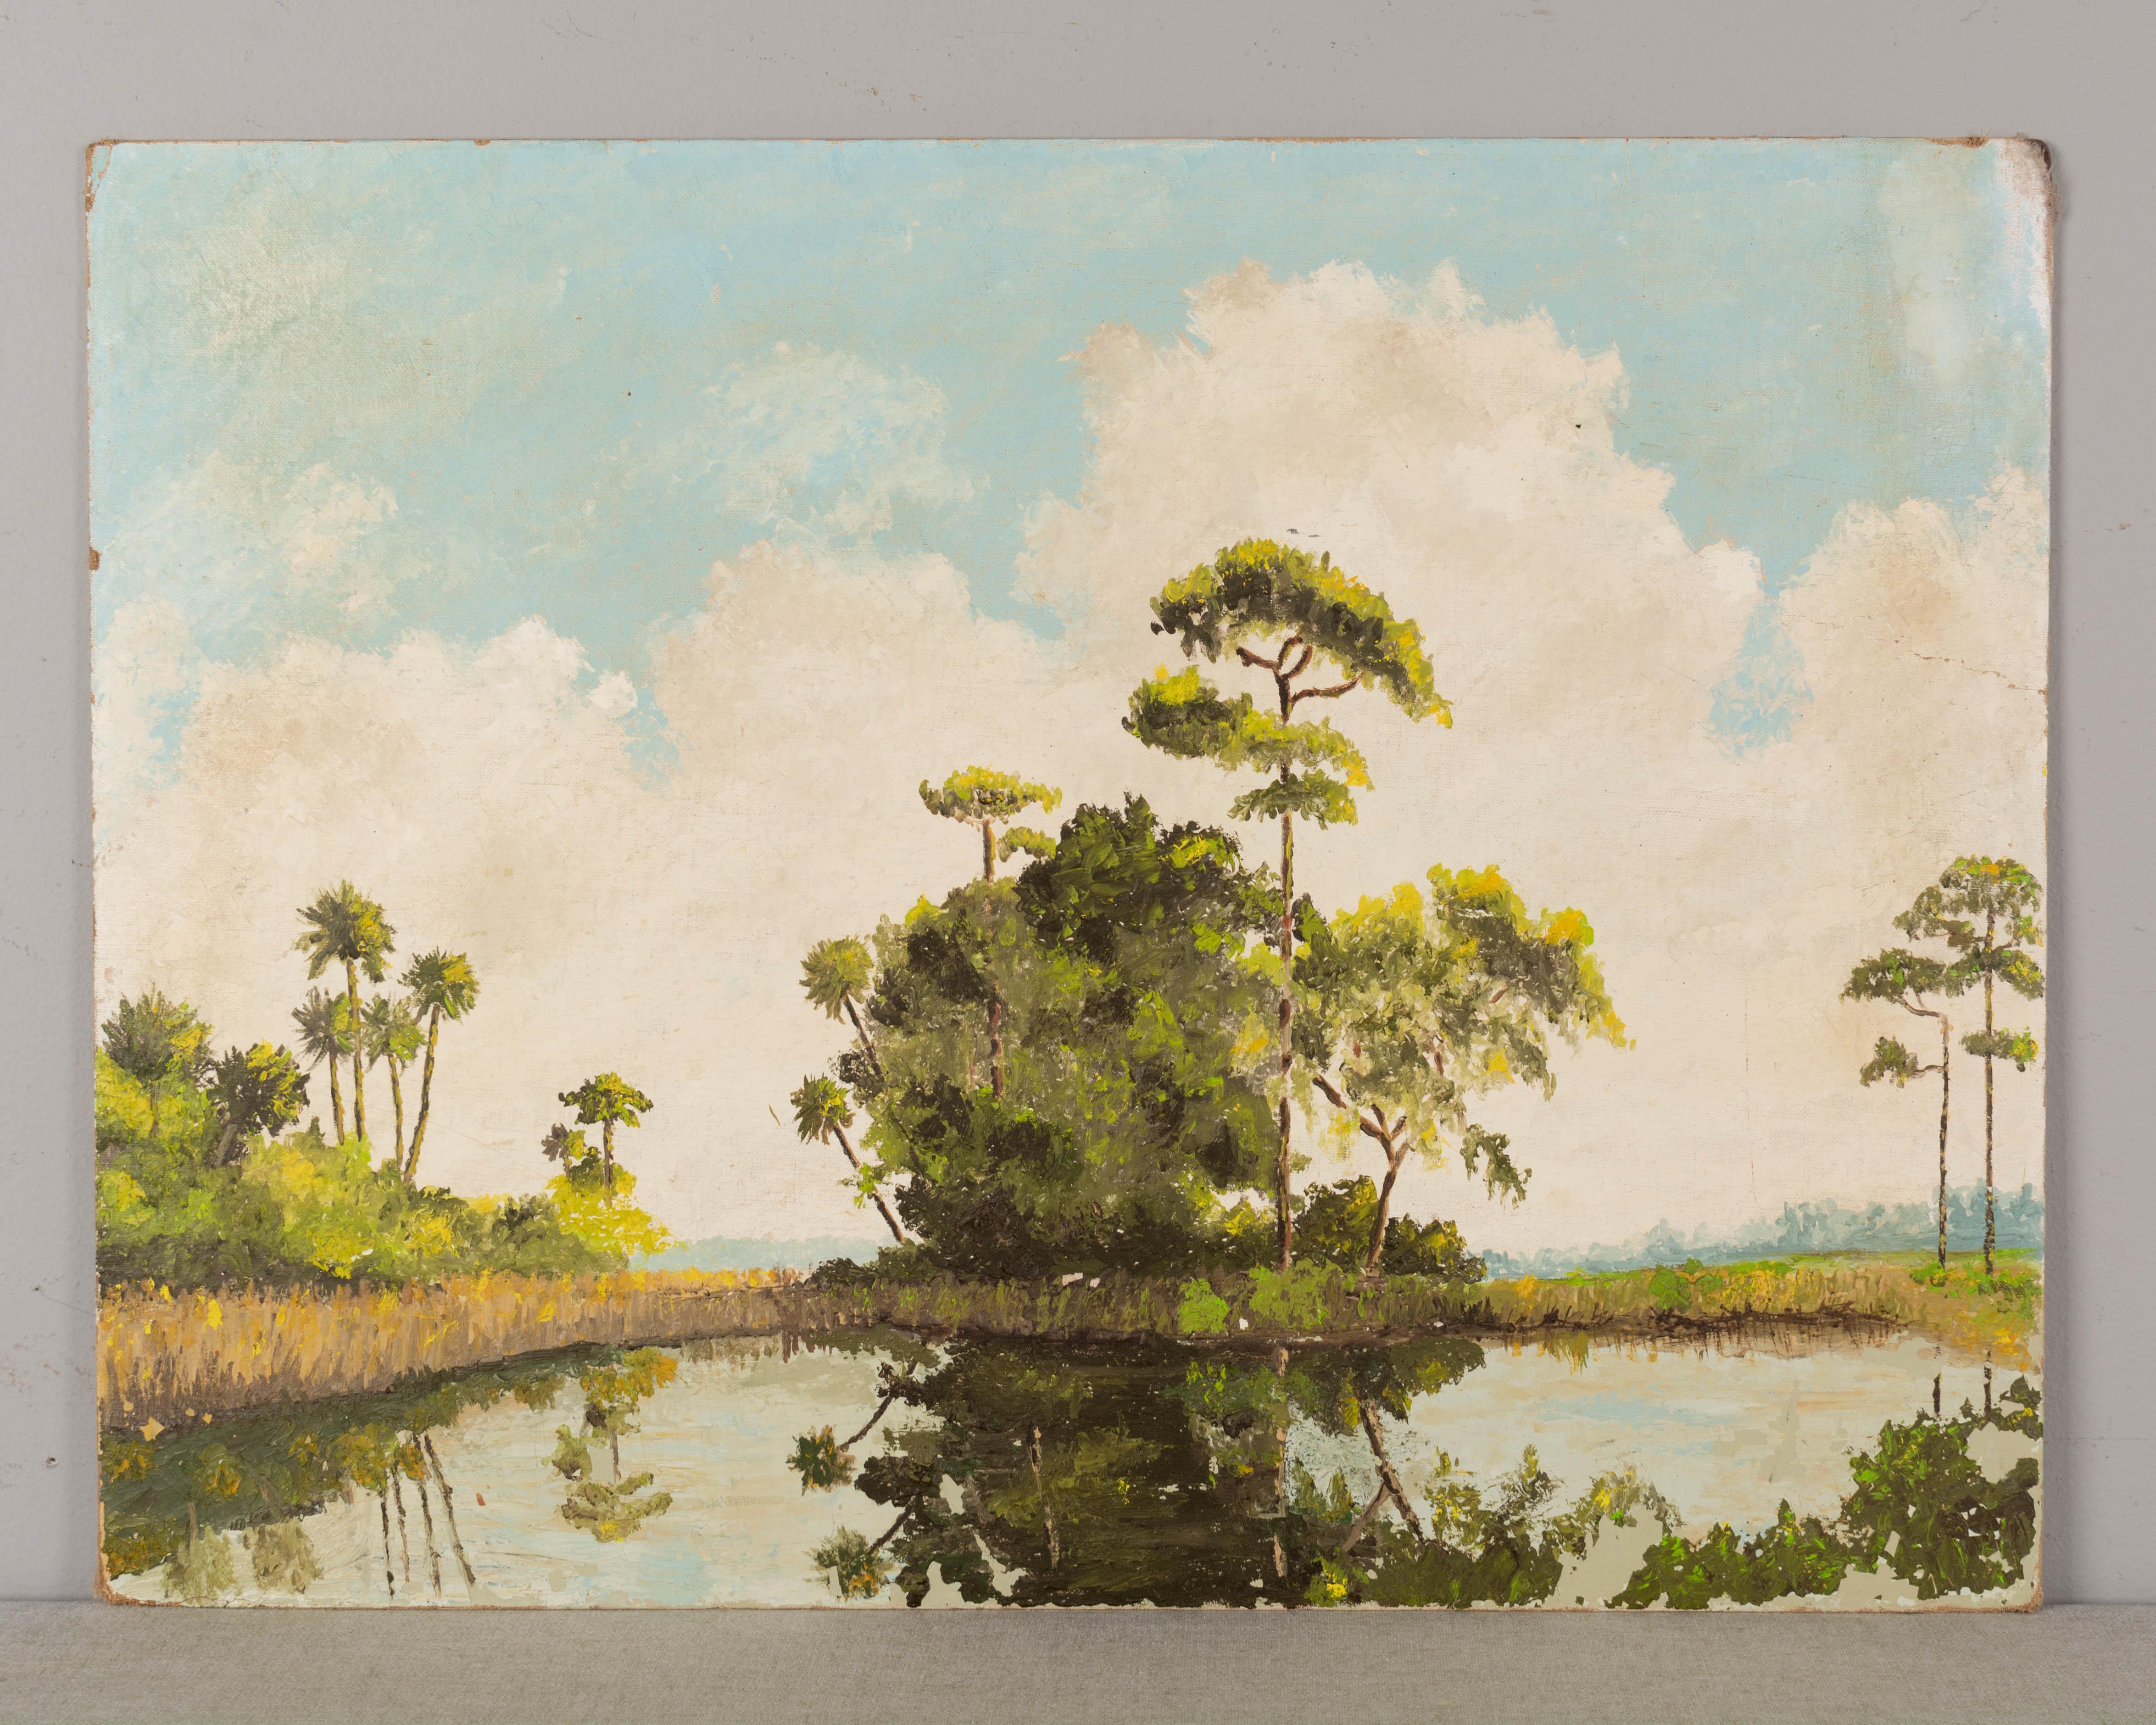 A mid century Florida Highwaymen painting on board. In the style of Harold Newton, but unsigned. Some discoloration especially in the sky, and some paint loss especially in the lower right. Please refer to photos for more details. Pictures are part